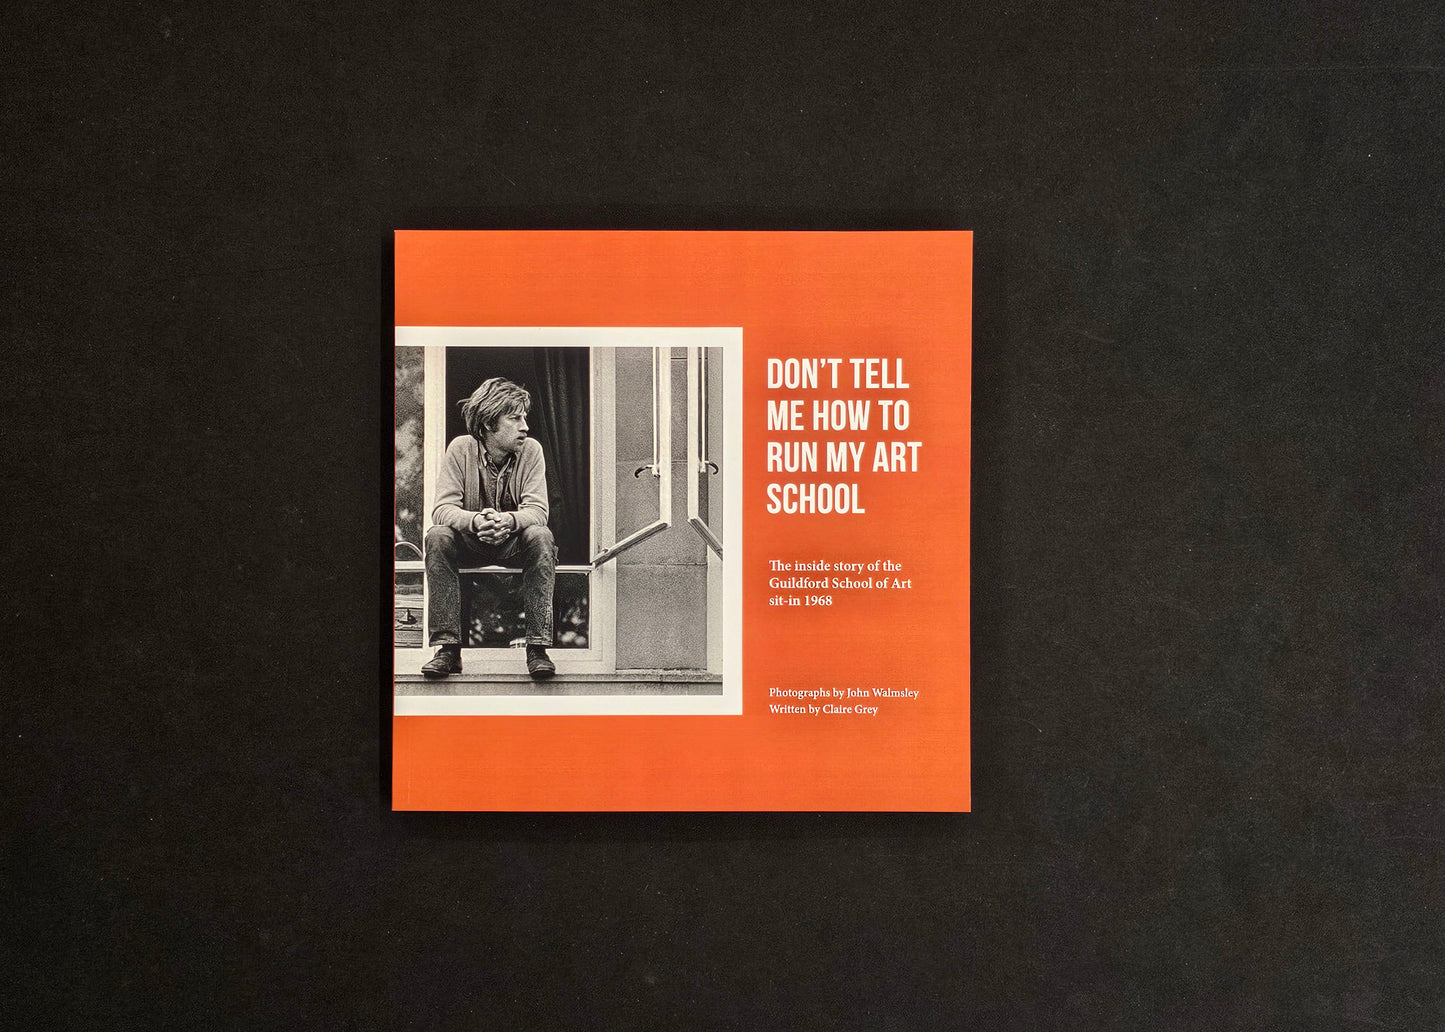 Don't tell me how to run my art school by John Walmsley and Claire Grey: Book + Print 2